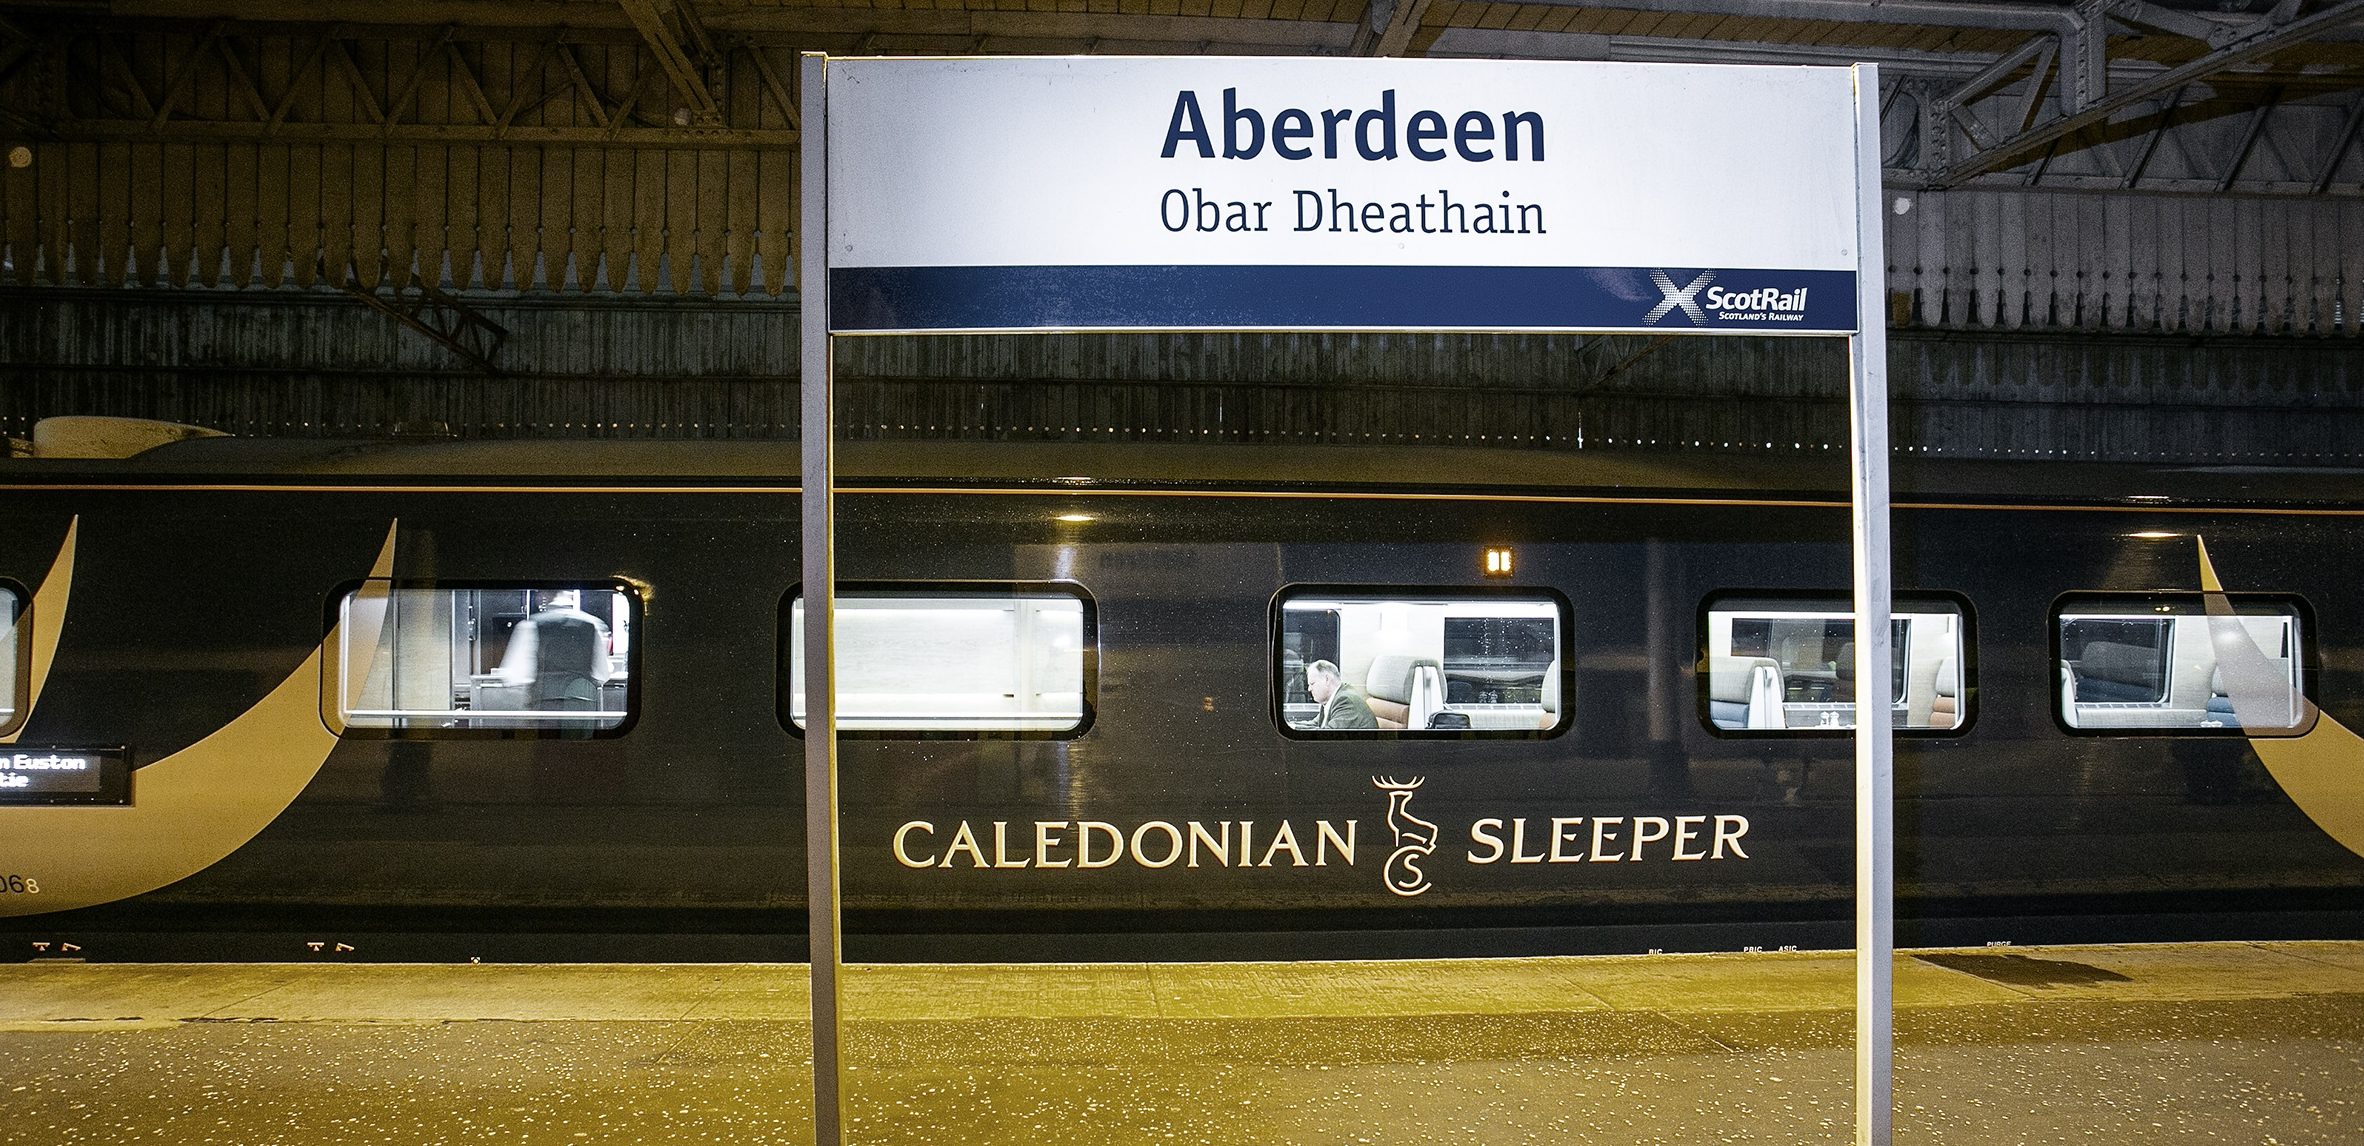 Caledonian Sleeper completes roll out of £150m new fleet of trains as service introduced on Highlander route